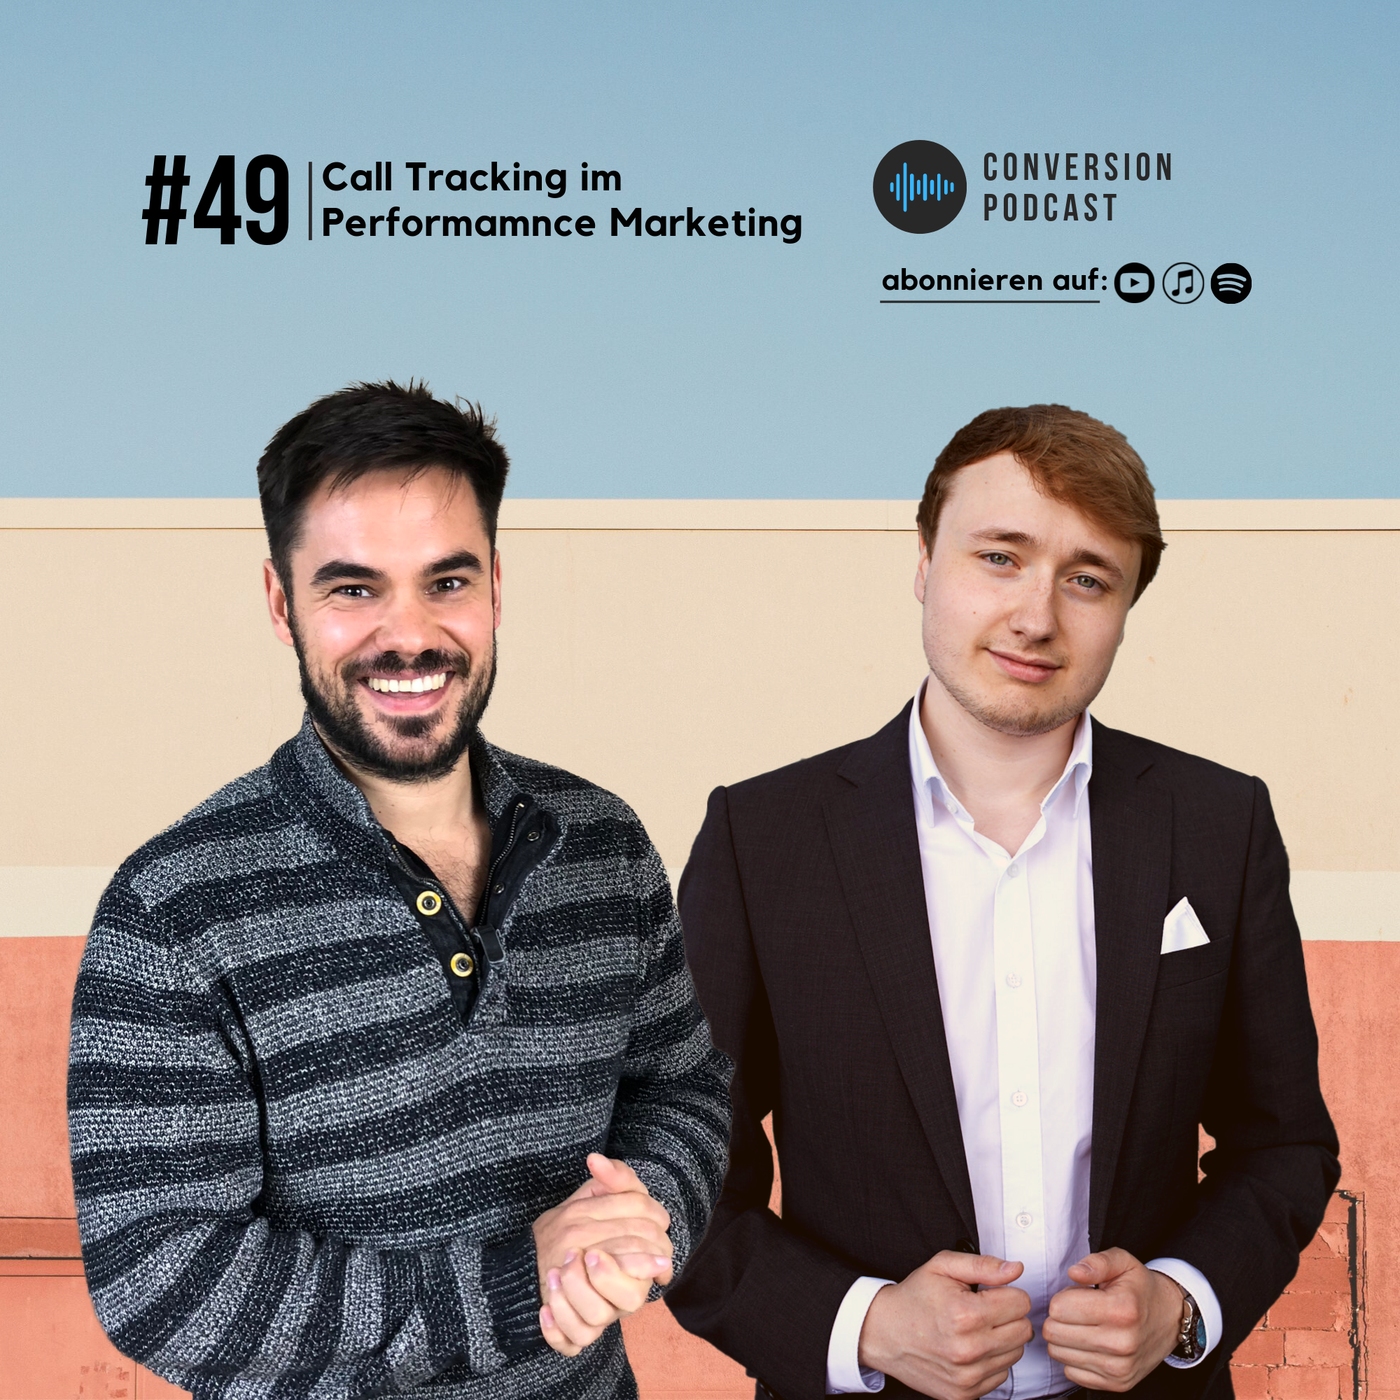 Call Tracking im Performance Marketing | #49 Conversion Podcast